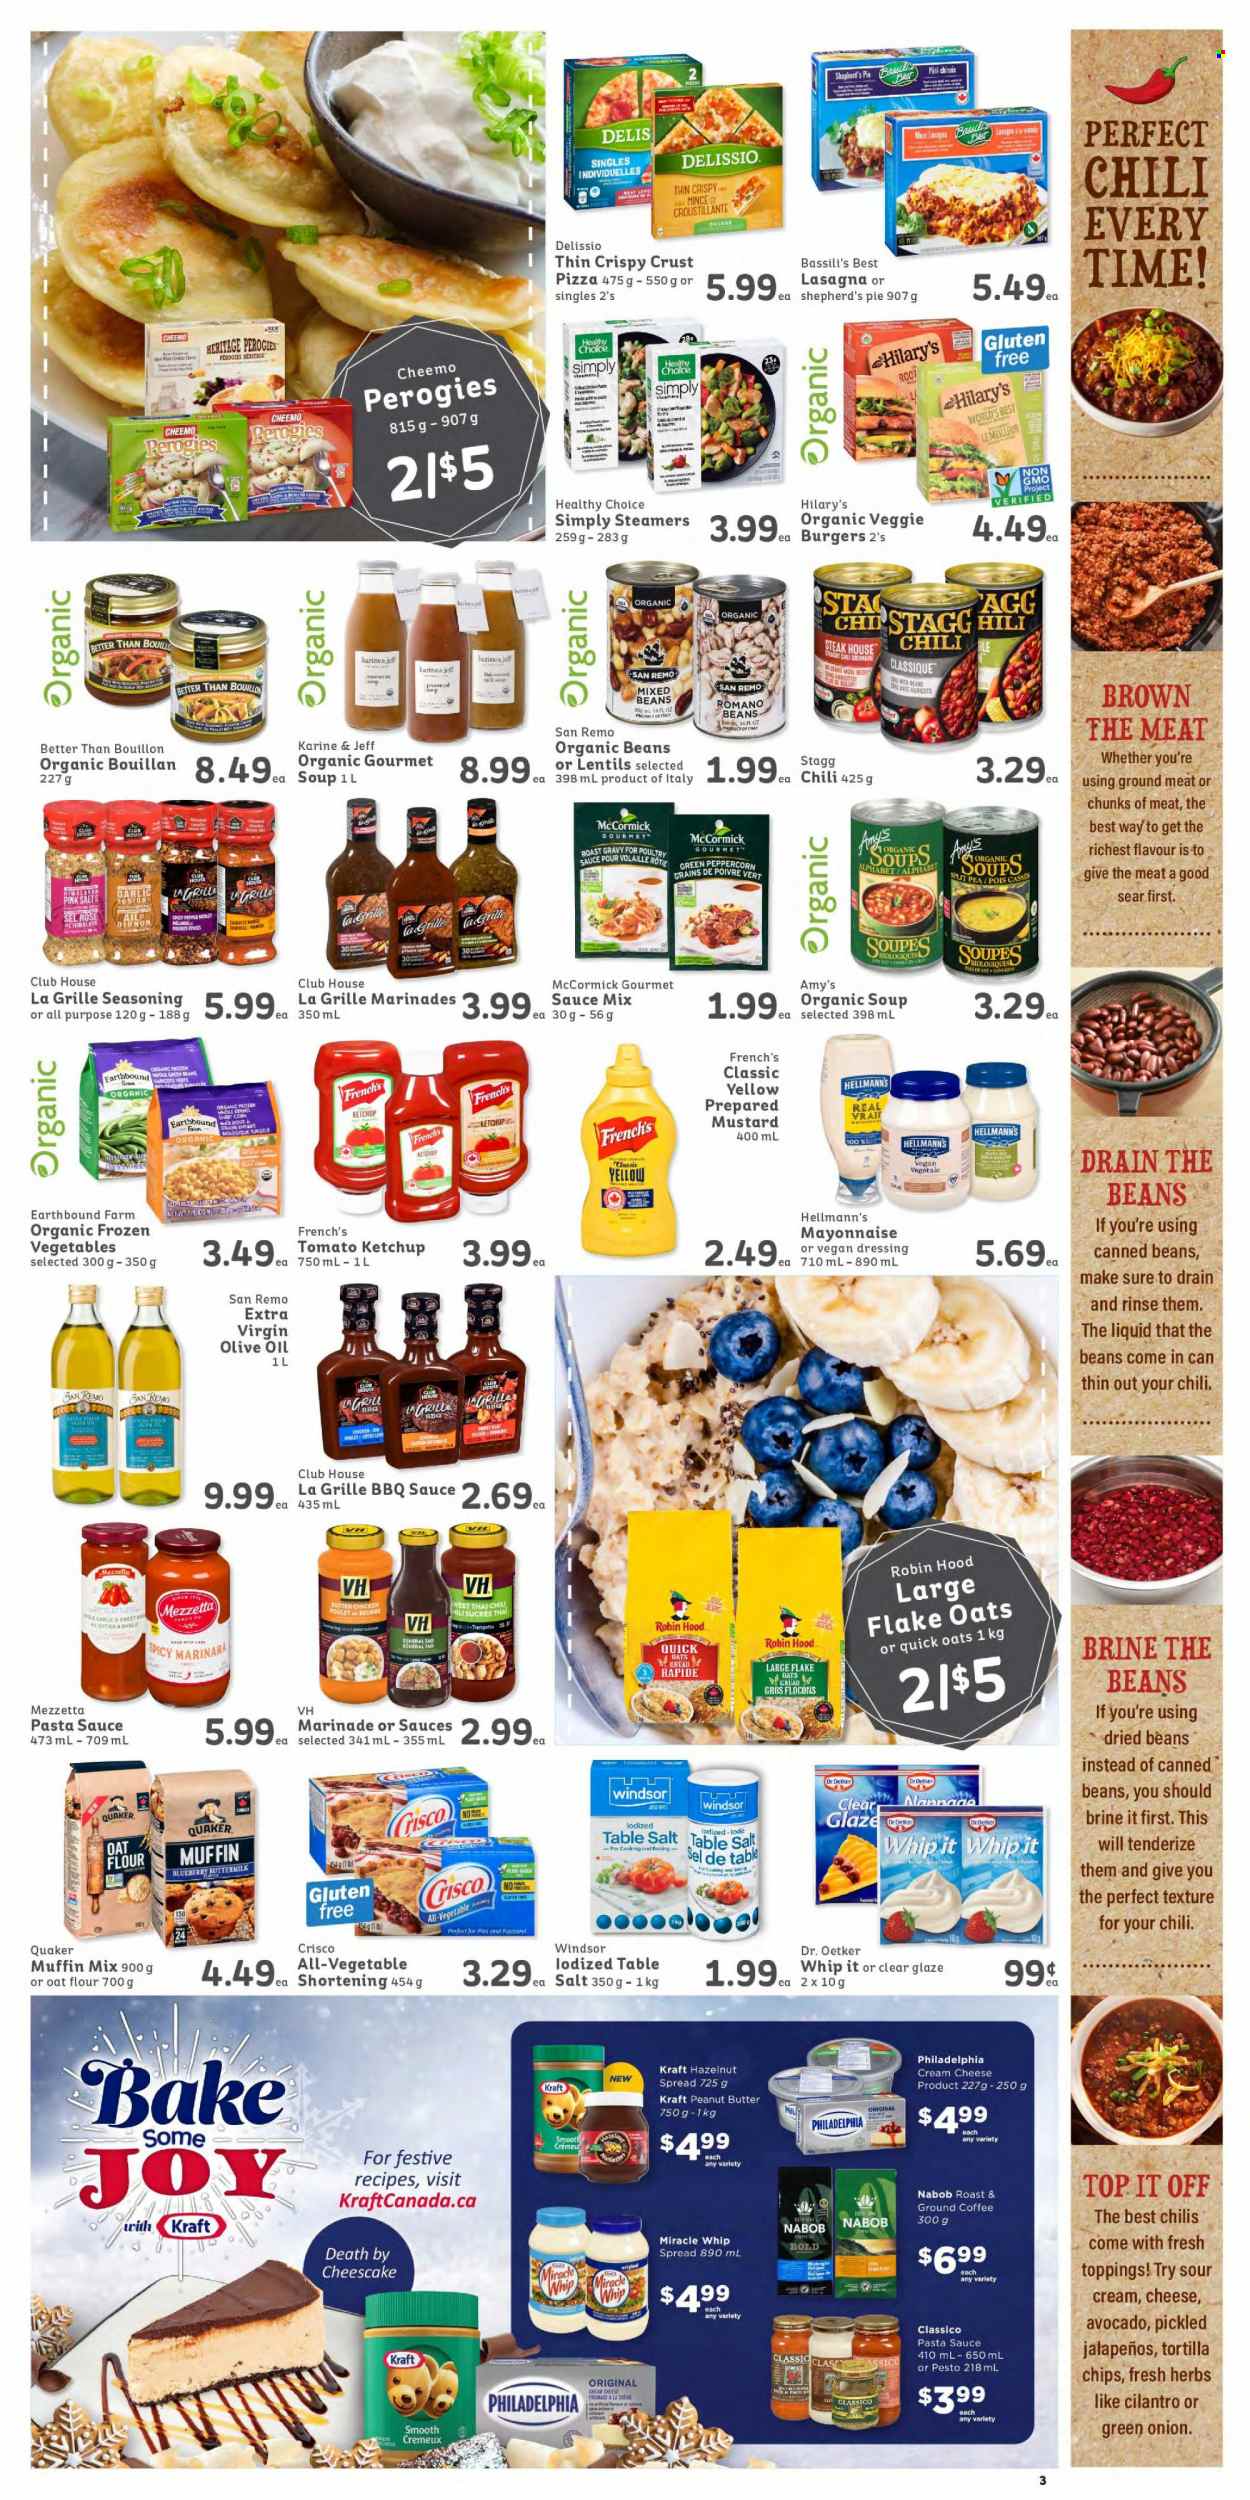 thumbnail - IGA Simple Goodness Flyer - November 19, 2021 - November 25, 2021 - Sales products - pie, muffin mix, garlic, green beans, avocado, pizza, pasta sauce, soup, hamburger, Quaker, lasagna meal, Healthy Choice, Kraft®, cream cheese, Dr. Oetker, buttermilk, mayonnaise, Miracle Whip, Hellmann’s, frozen vegetables, tortilla chips, bouillon, Crisco, shortening, lentils, Quick Oats, cilantro, spice, BBQ sauce, mustard, dressing, marinade, Classico, olive oil, oil, peanut butter, coffee, ground coffee, rosé wine, ketchup, pesto, Philadelphia, steak. Page 3.